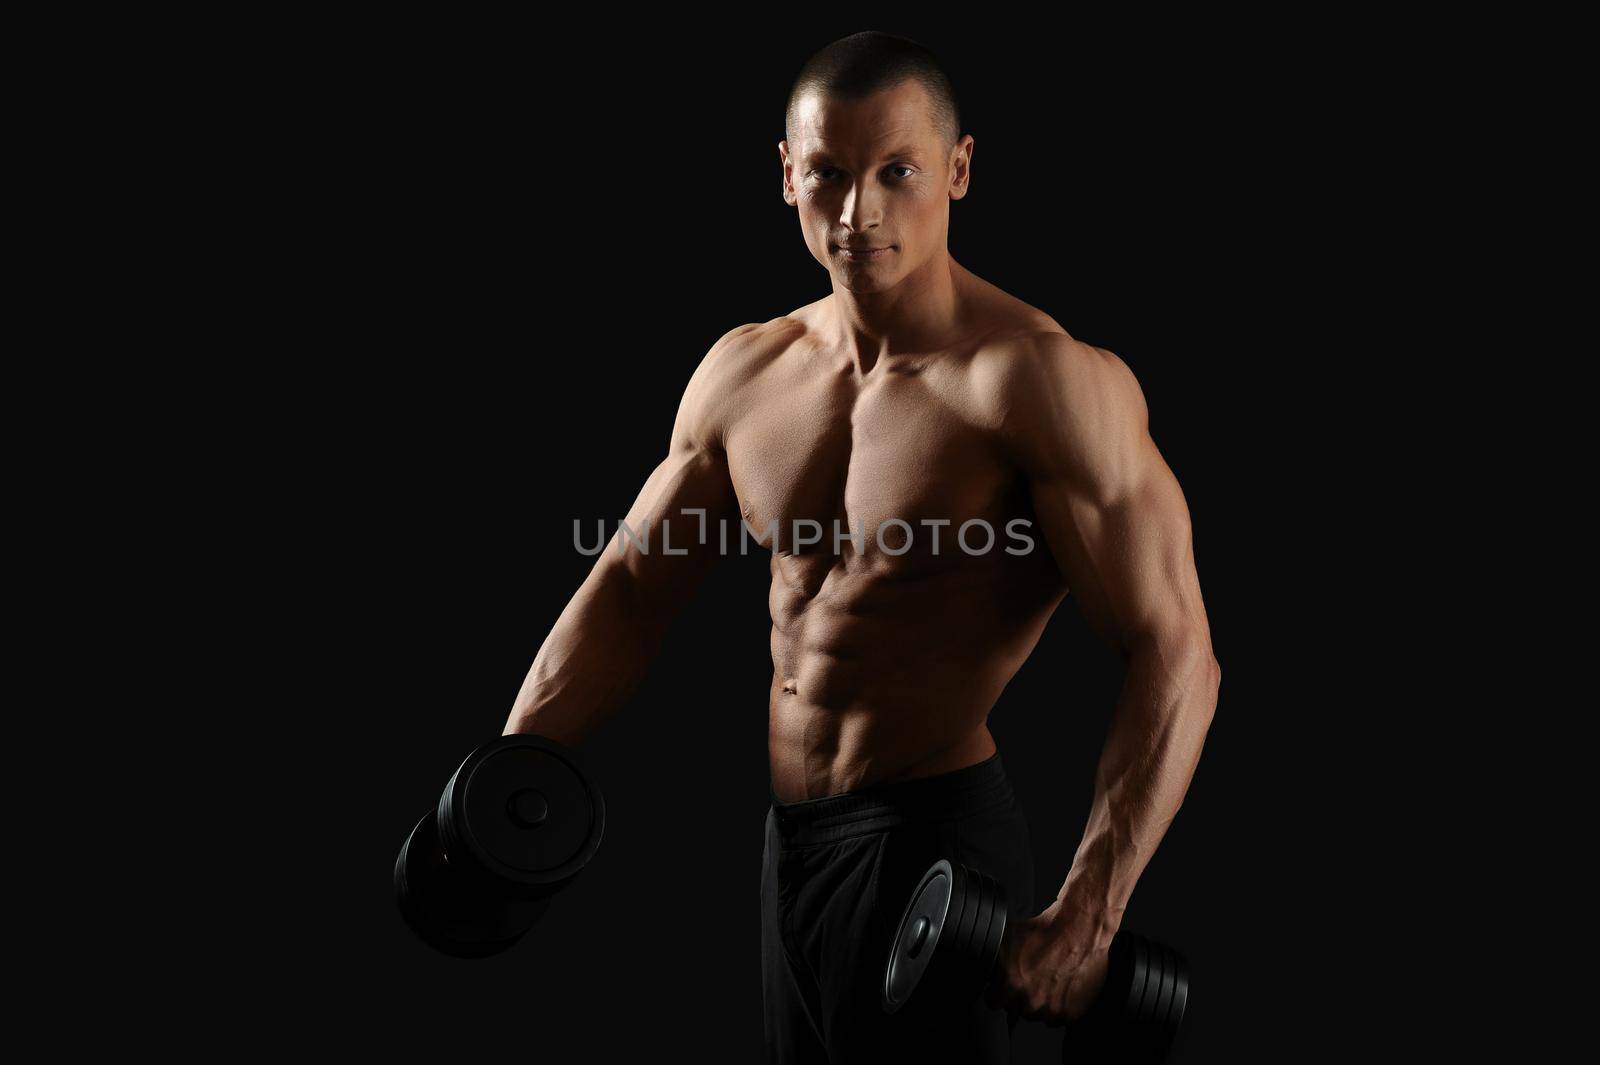 In the name of perfect body. Horizontal studio shot of a young bodybuilder man posing with dumbbells smiling to the camera posing shirtless with his fit and toned torso